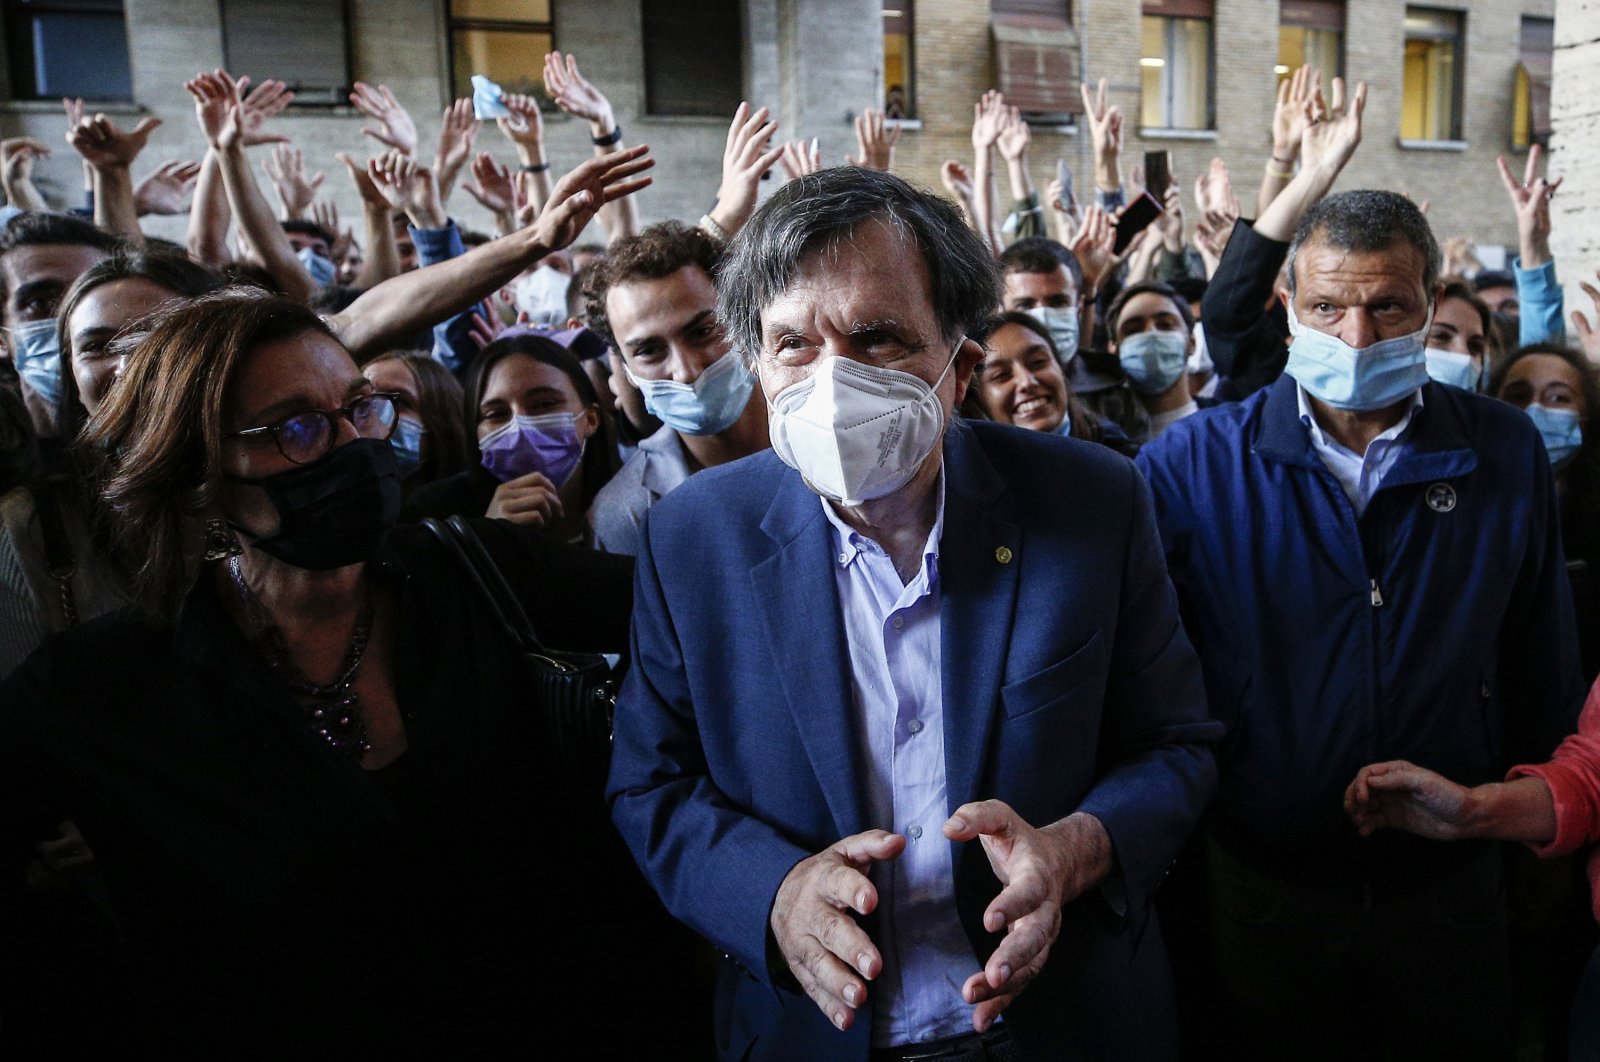 Italian physicist Giorgio Parisi is cheered by students as he arrives at the Sapienza University, in Rome, Italy, Oct. 5, 2021. (AP Photo)